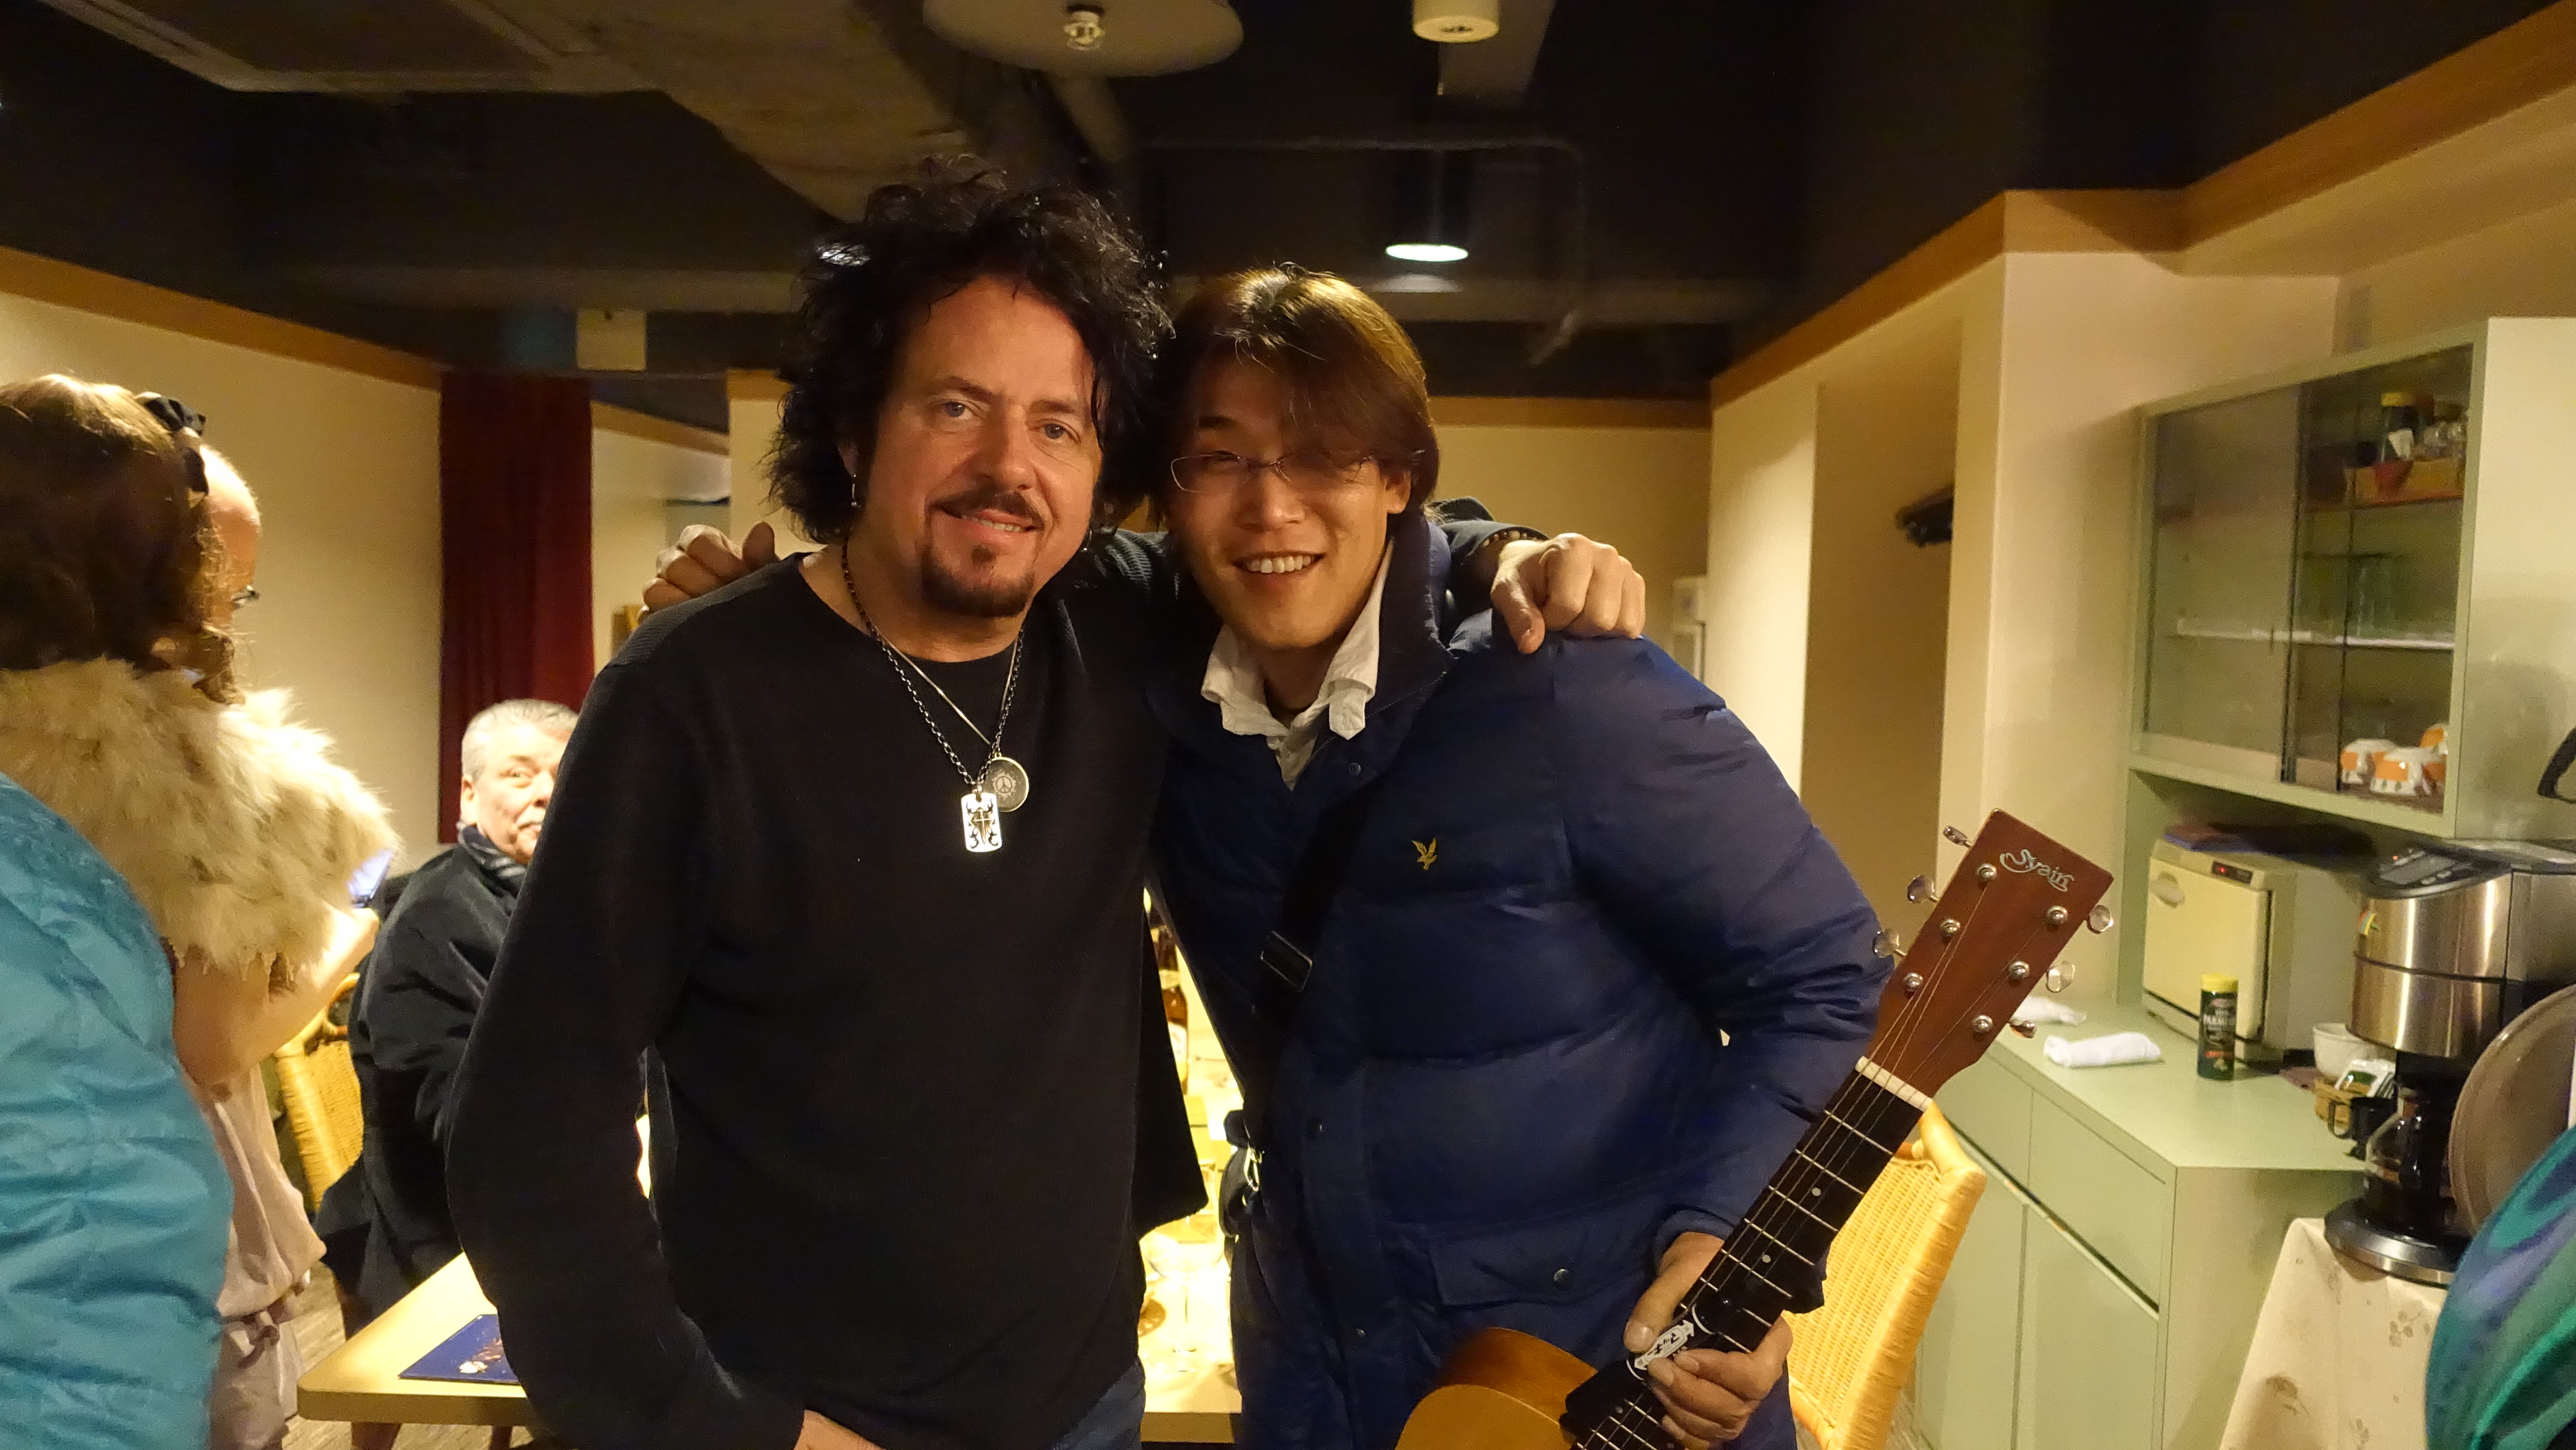 With Steve Lukather